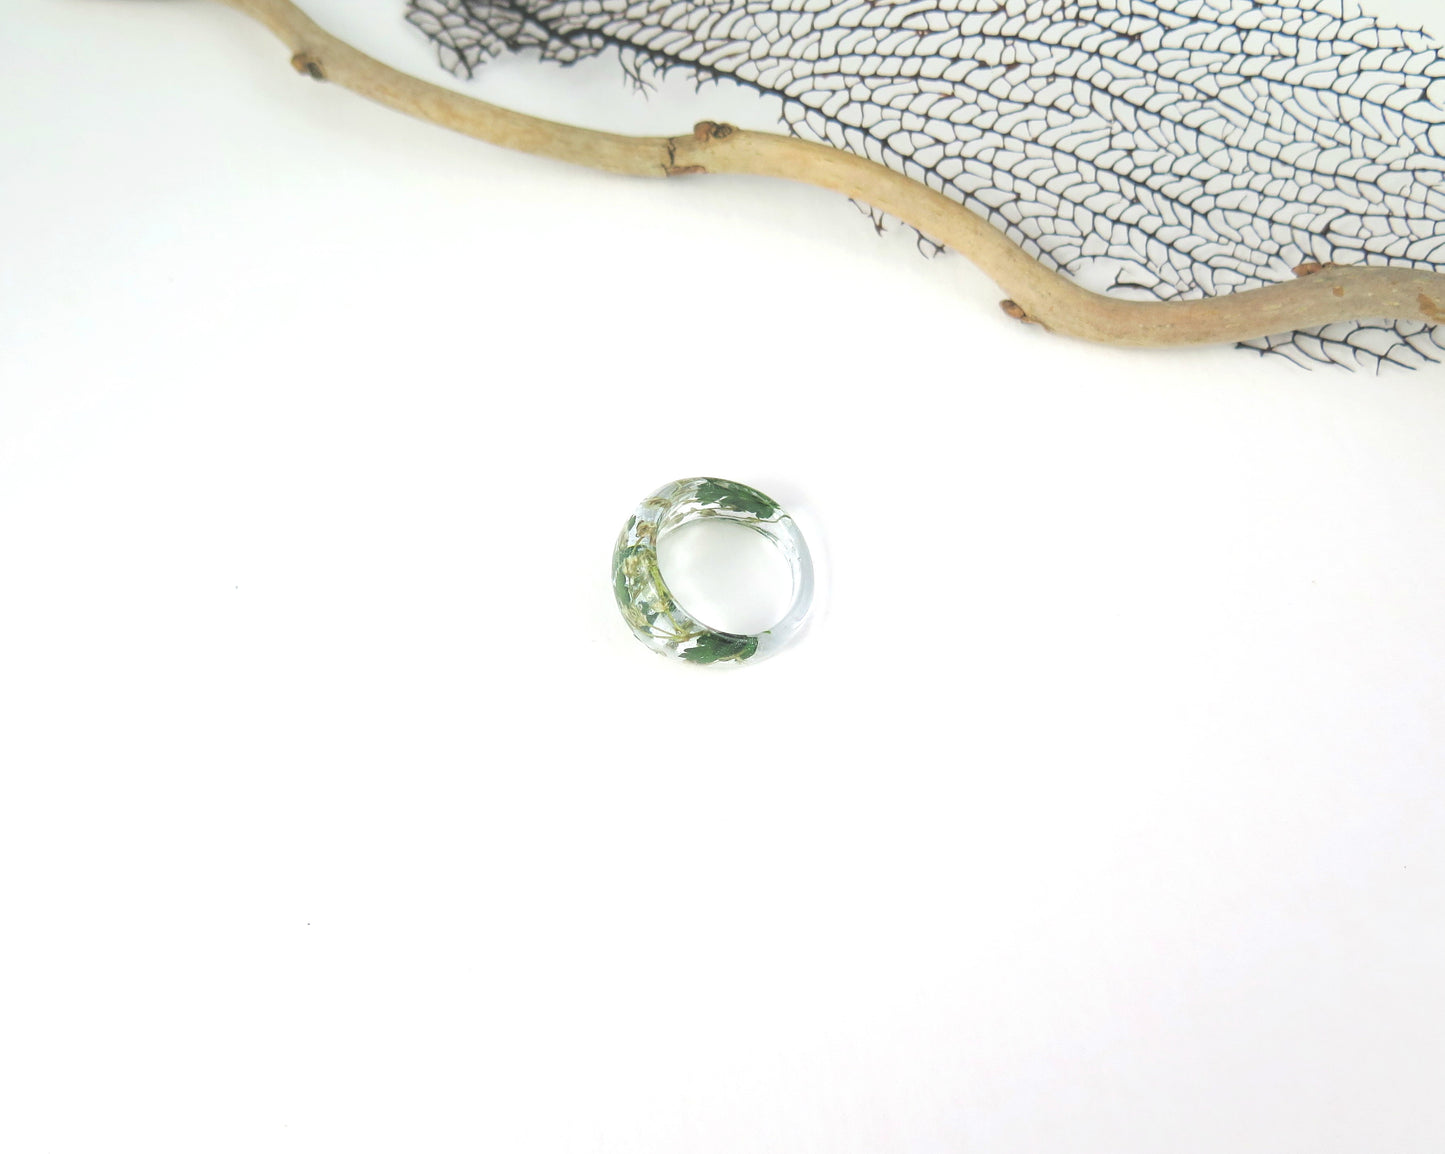 Botanical ring, Nature ring, Pressed flower jewelry, Green ring